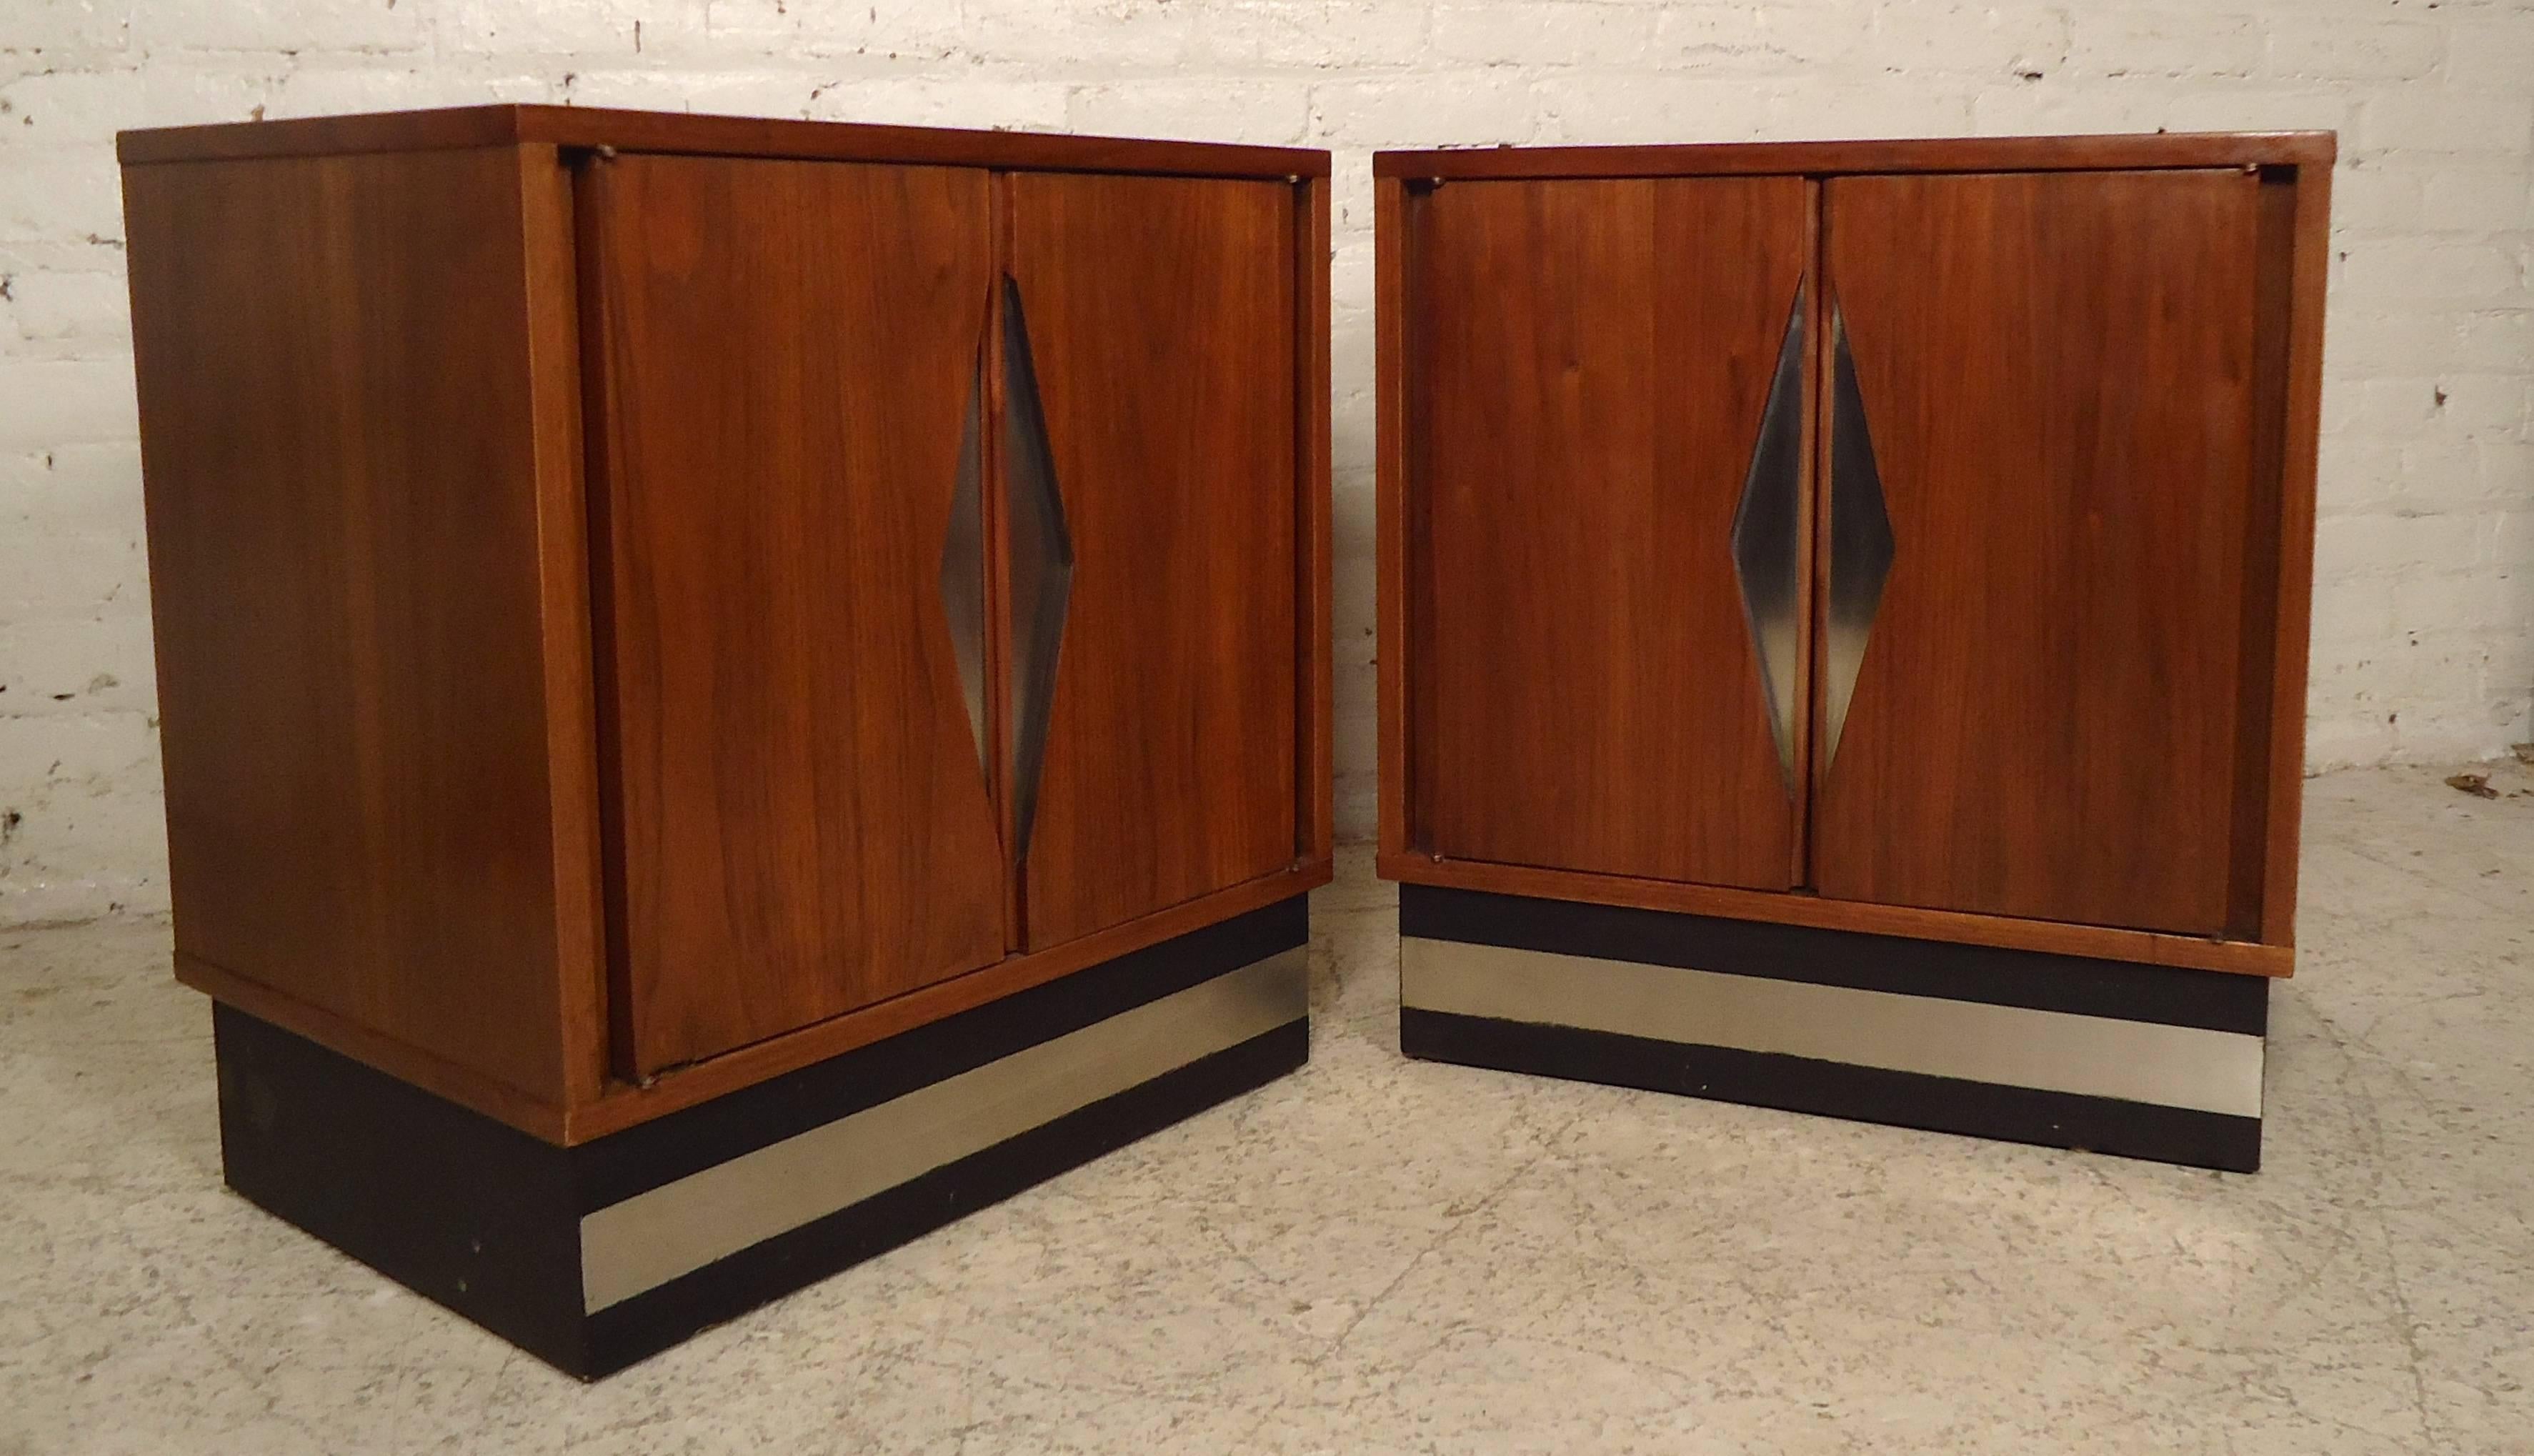 This unique pair of vintage-modern nightstands features a chrome diamond front design sculpted in the center of two doors. Made of rich walnut grain and sits on a sturdy black base, each contains one shelf. 

Please confirm item location (NY or